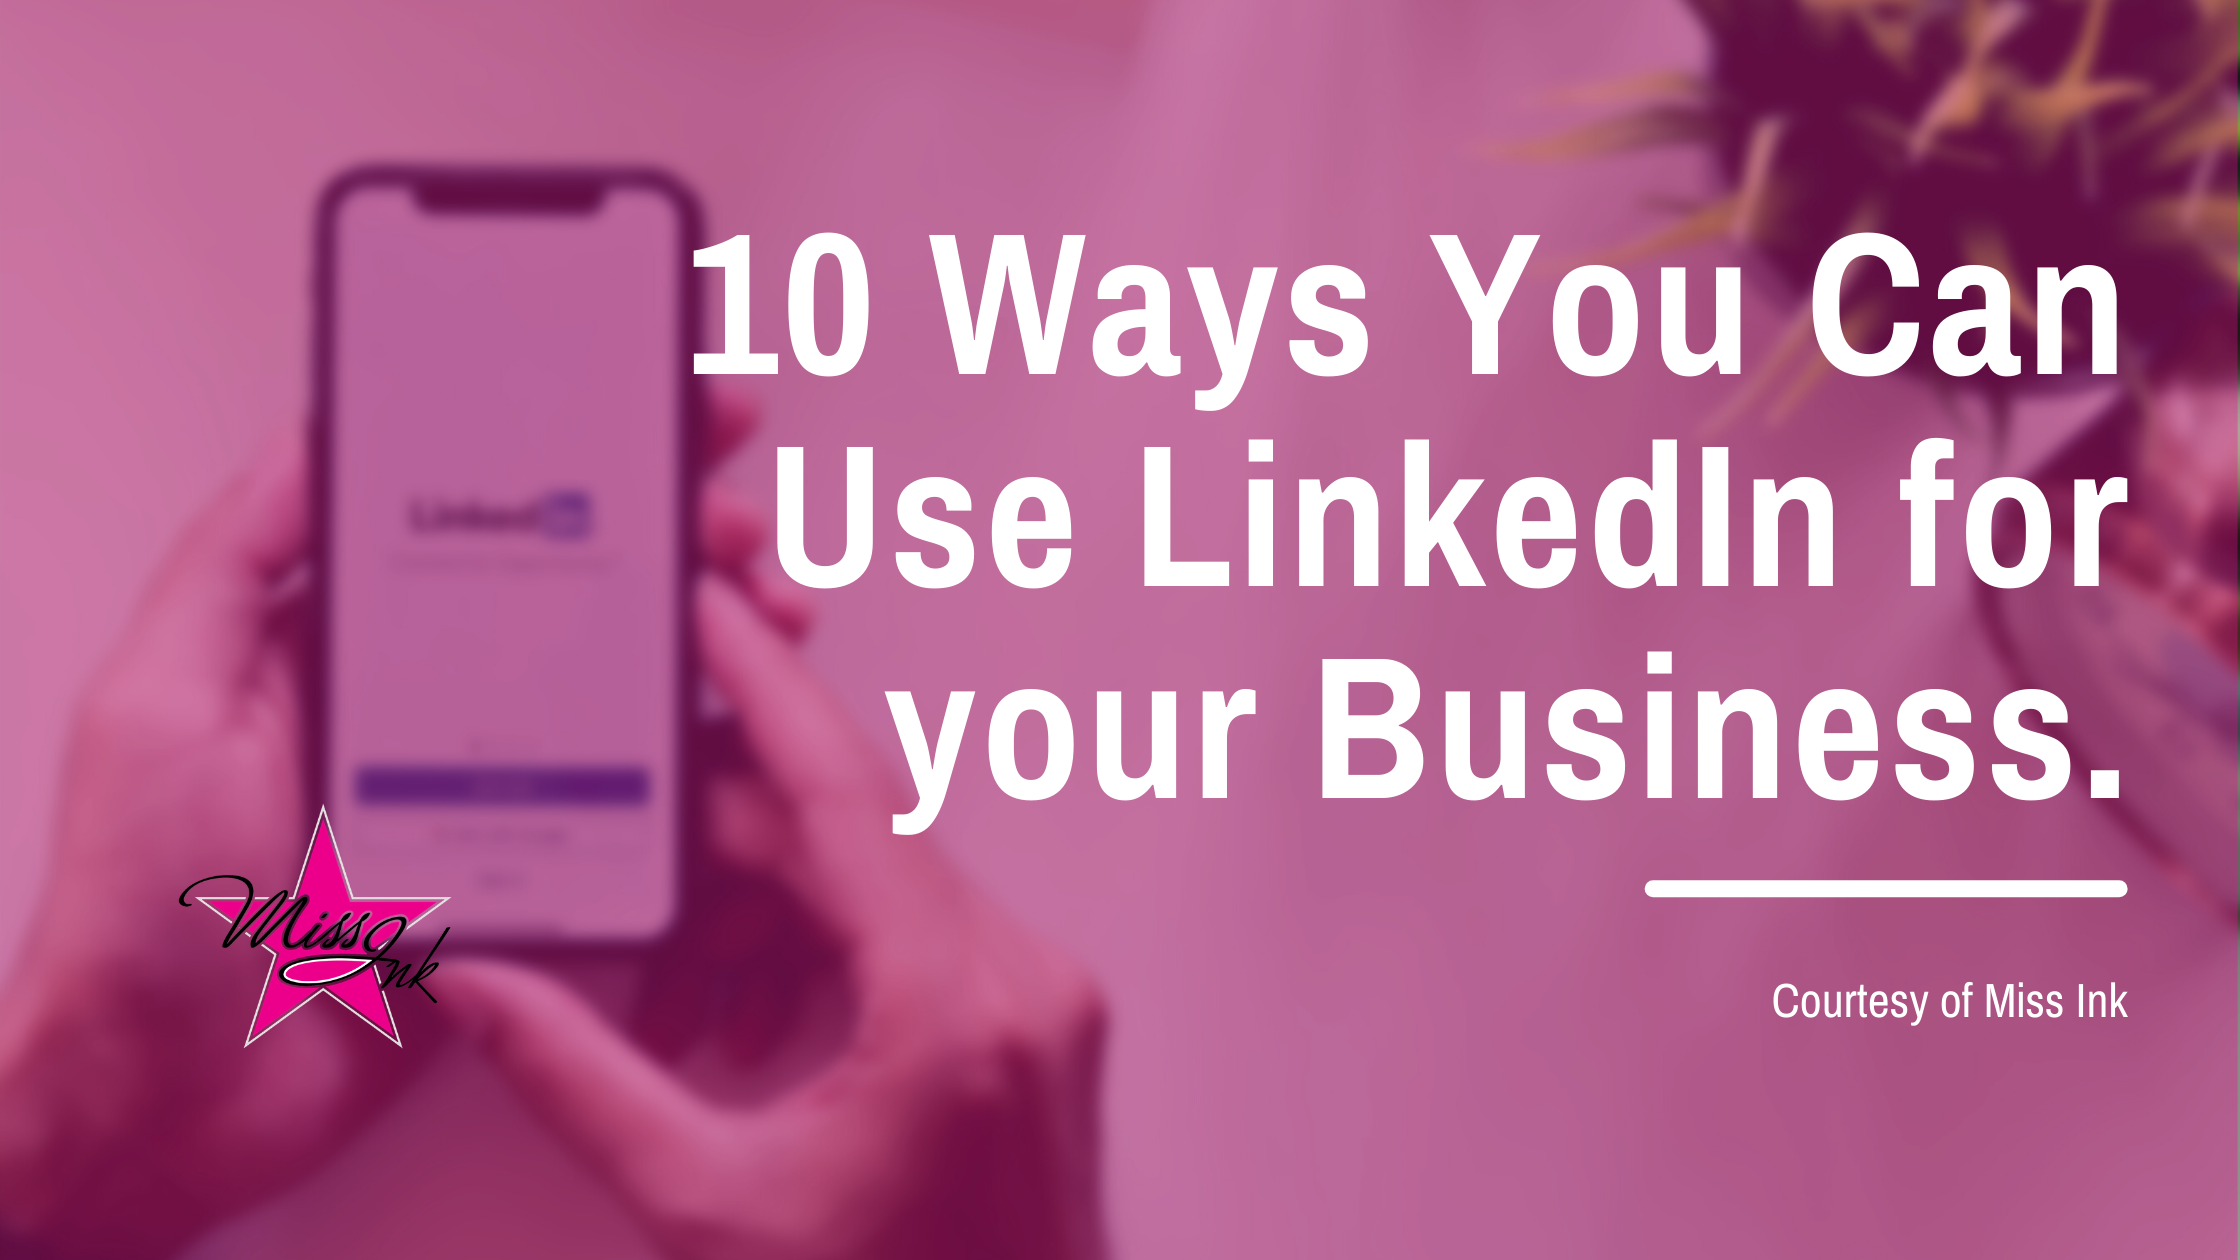 10 Ways You Can Use LinkedIn for your Business.